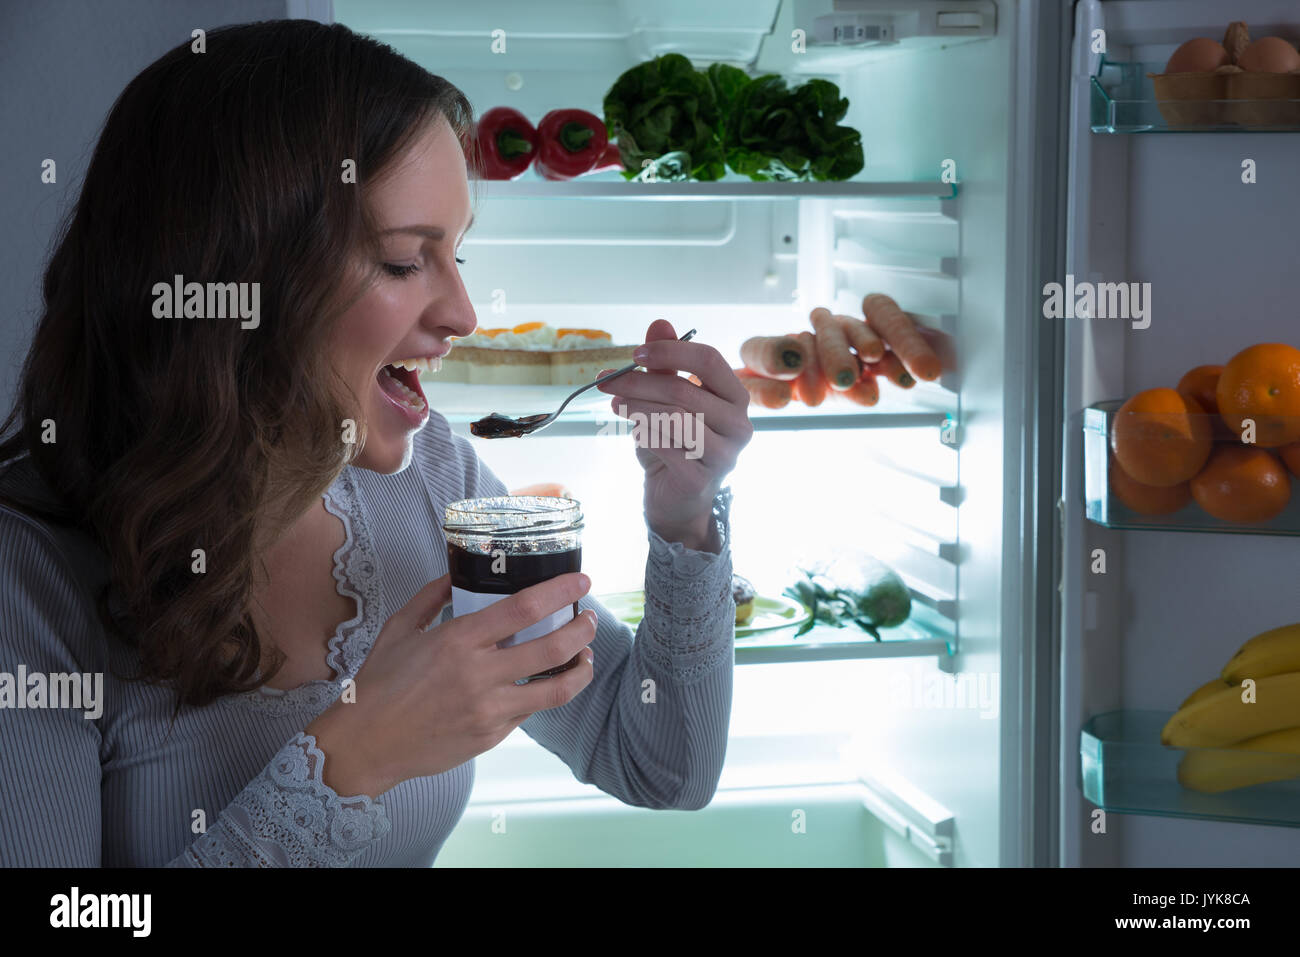 Young Woman Eating In Front Of Fridge In Kitchen Stock Photo